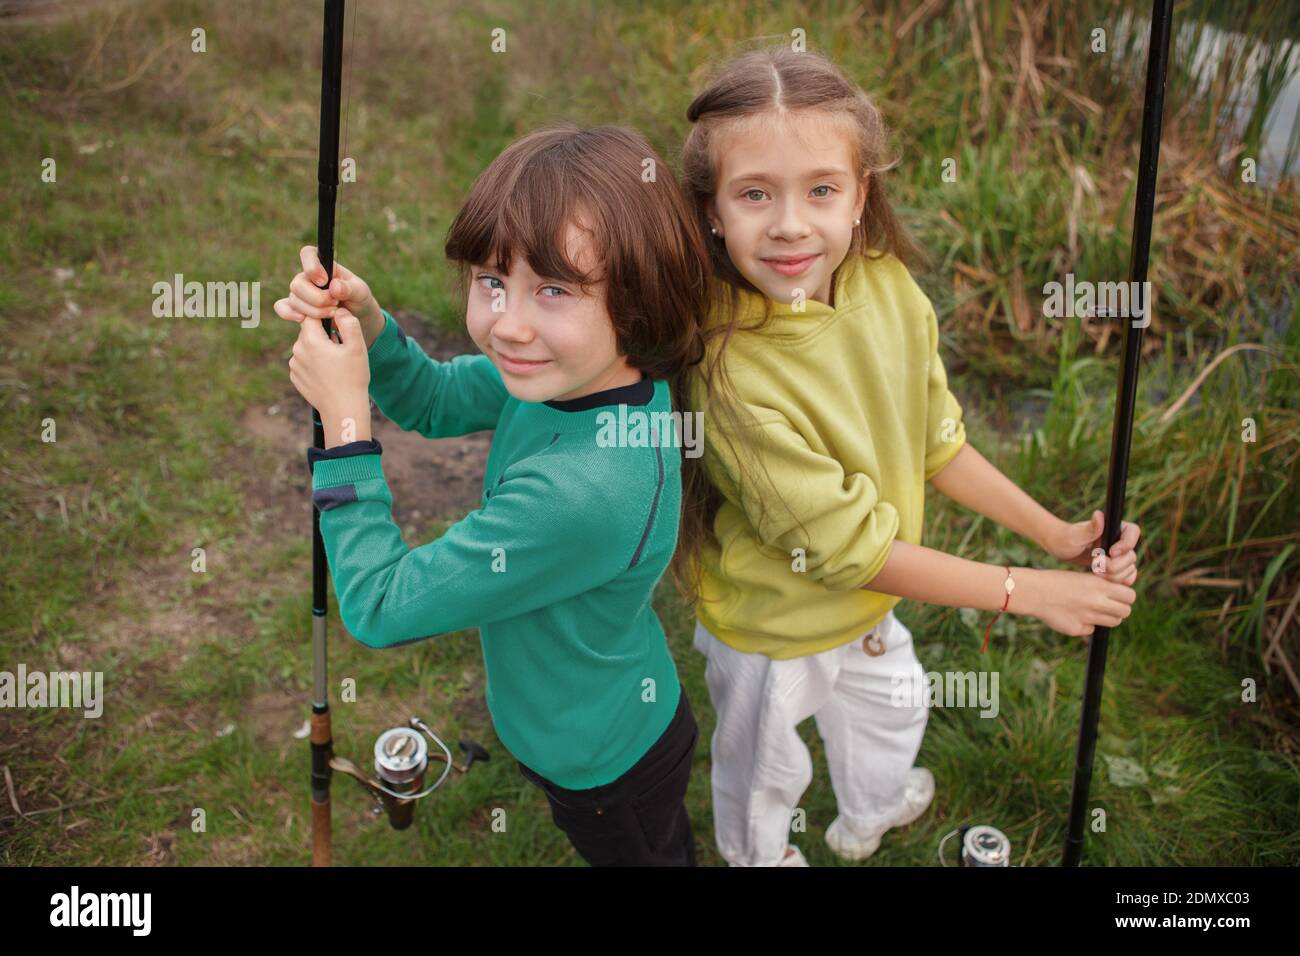 Top view shot of cheerful young boy and girl smiling to the camera, standing back to back holding fishing rods outdoors Stock Photo